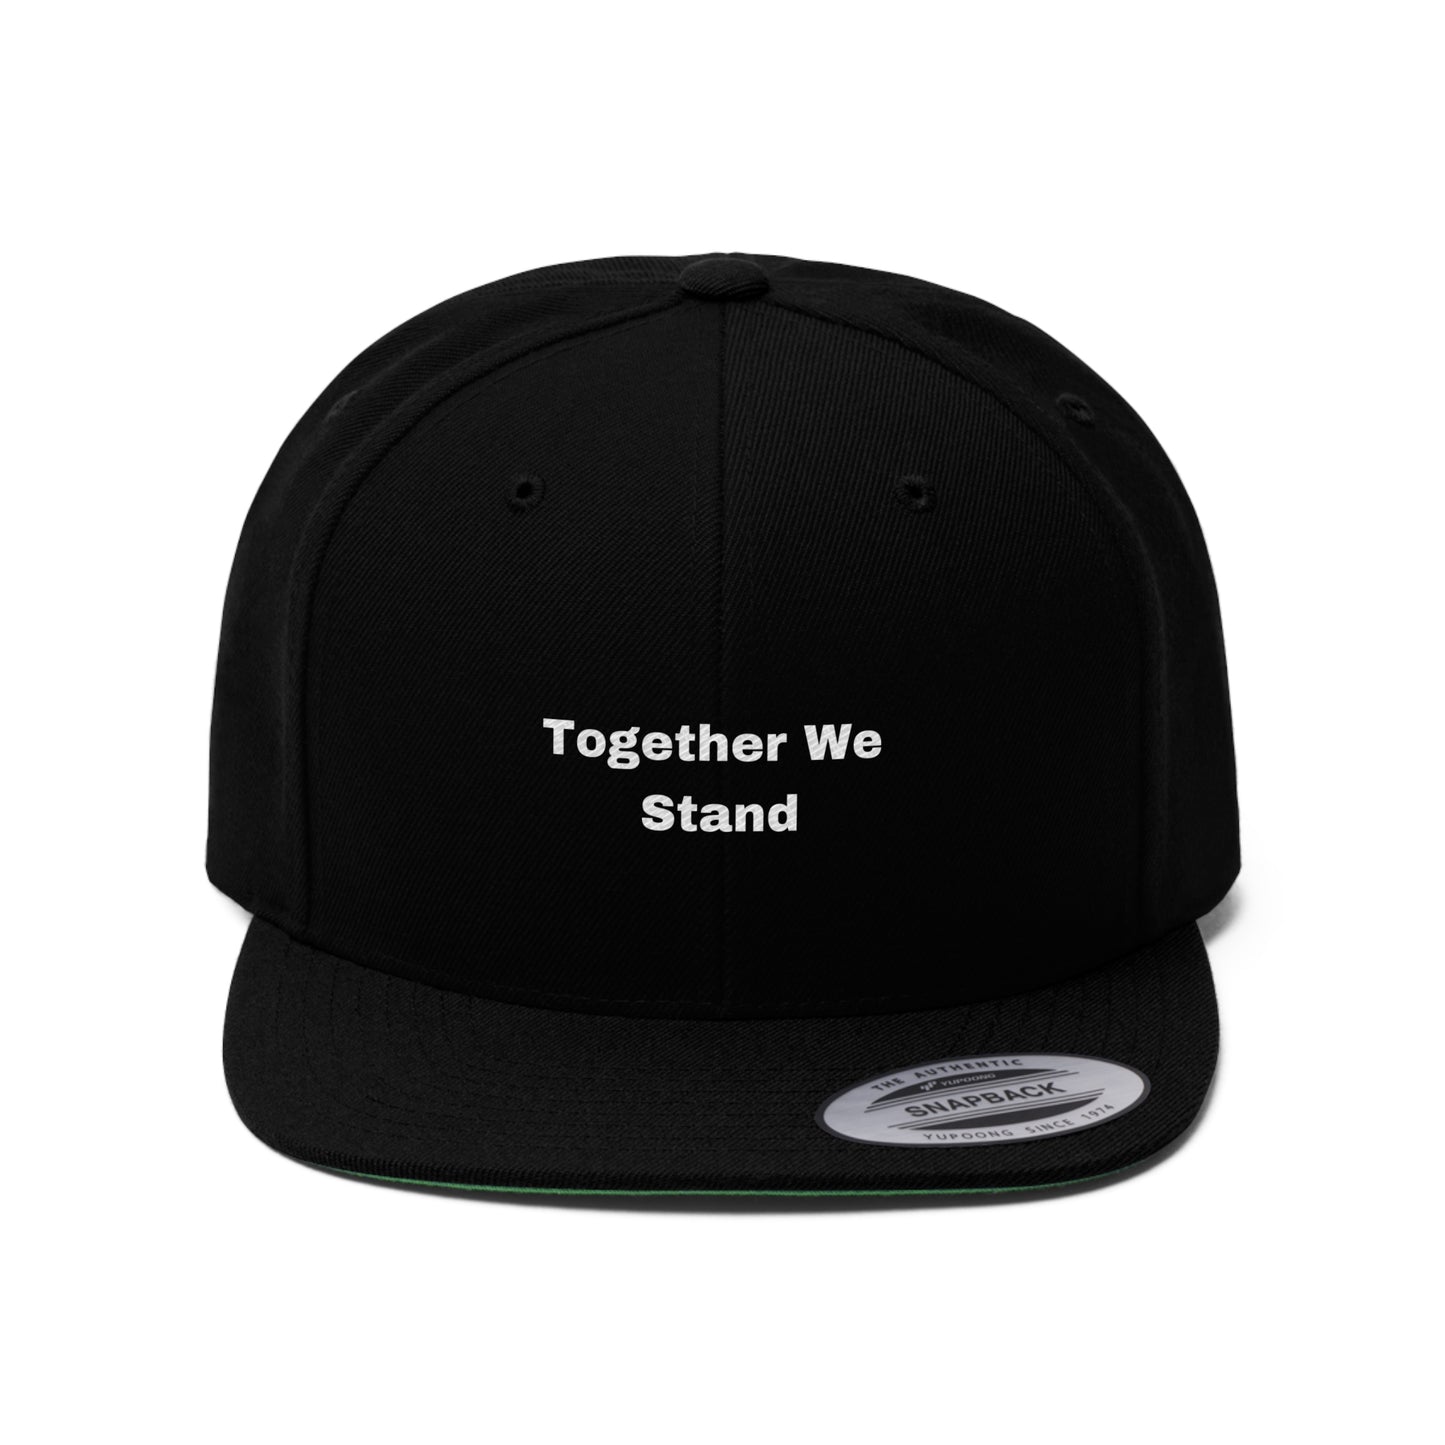 Together We Stand Flat Bill Hat